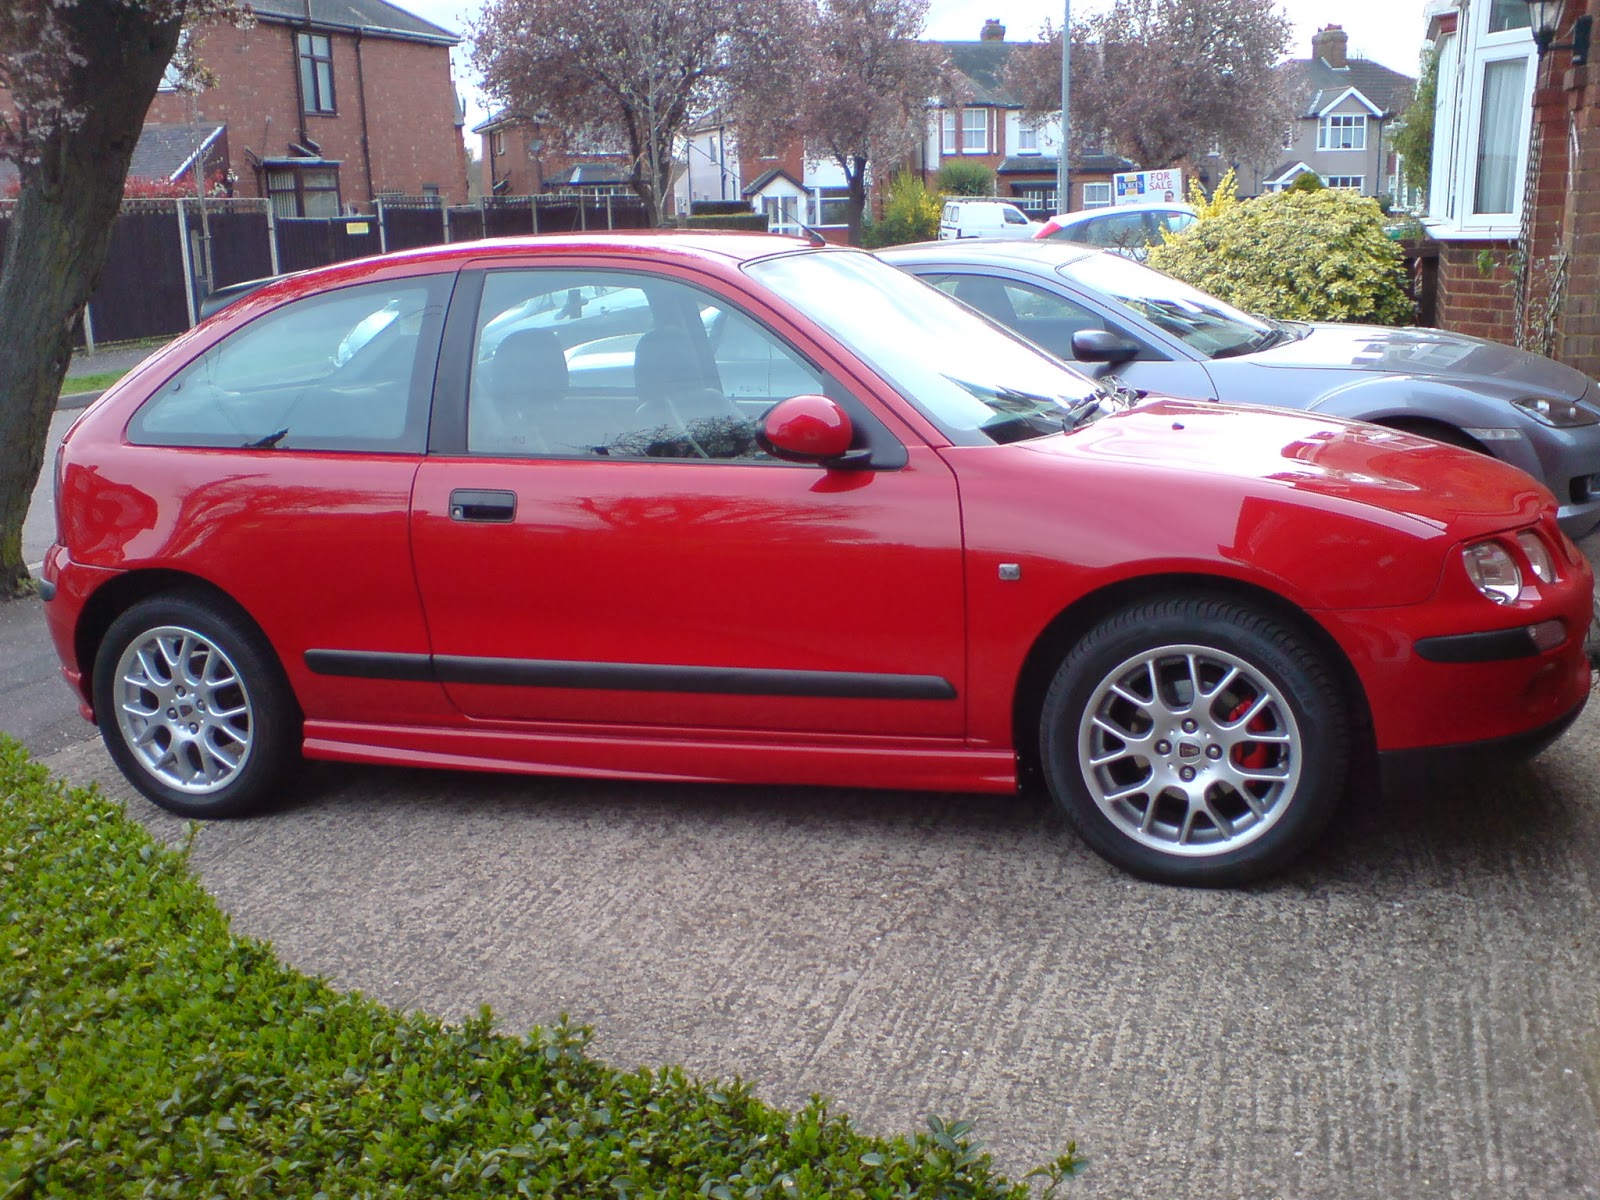 MG ZR Rover 25 with side skirts 16" hairpins solar red